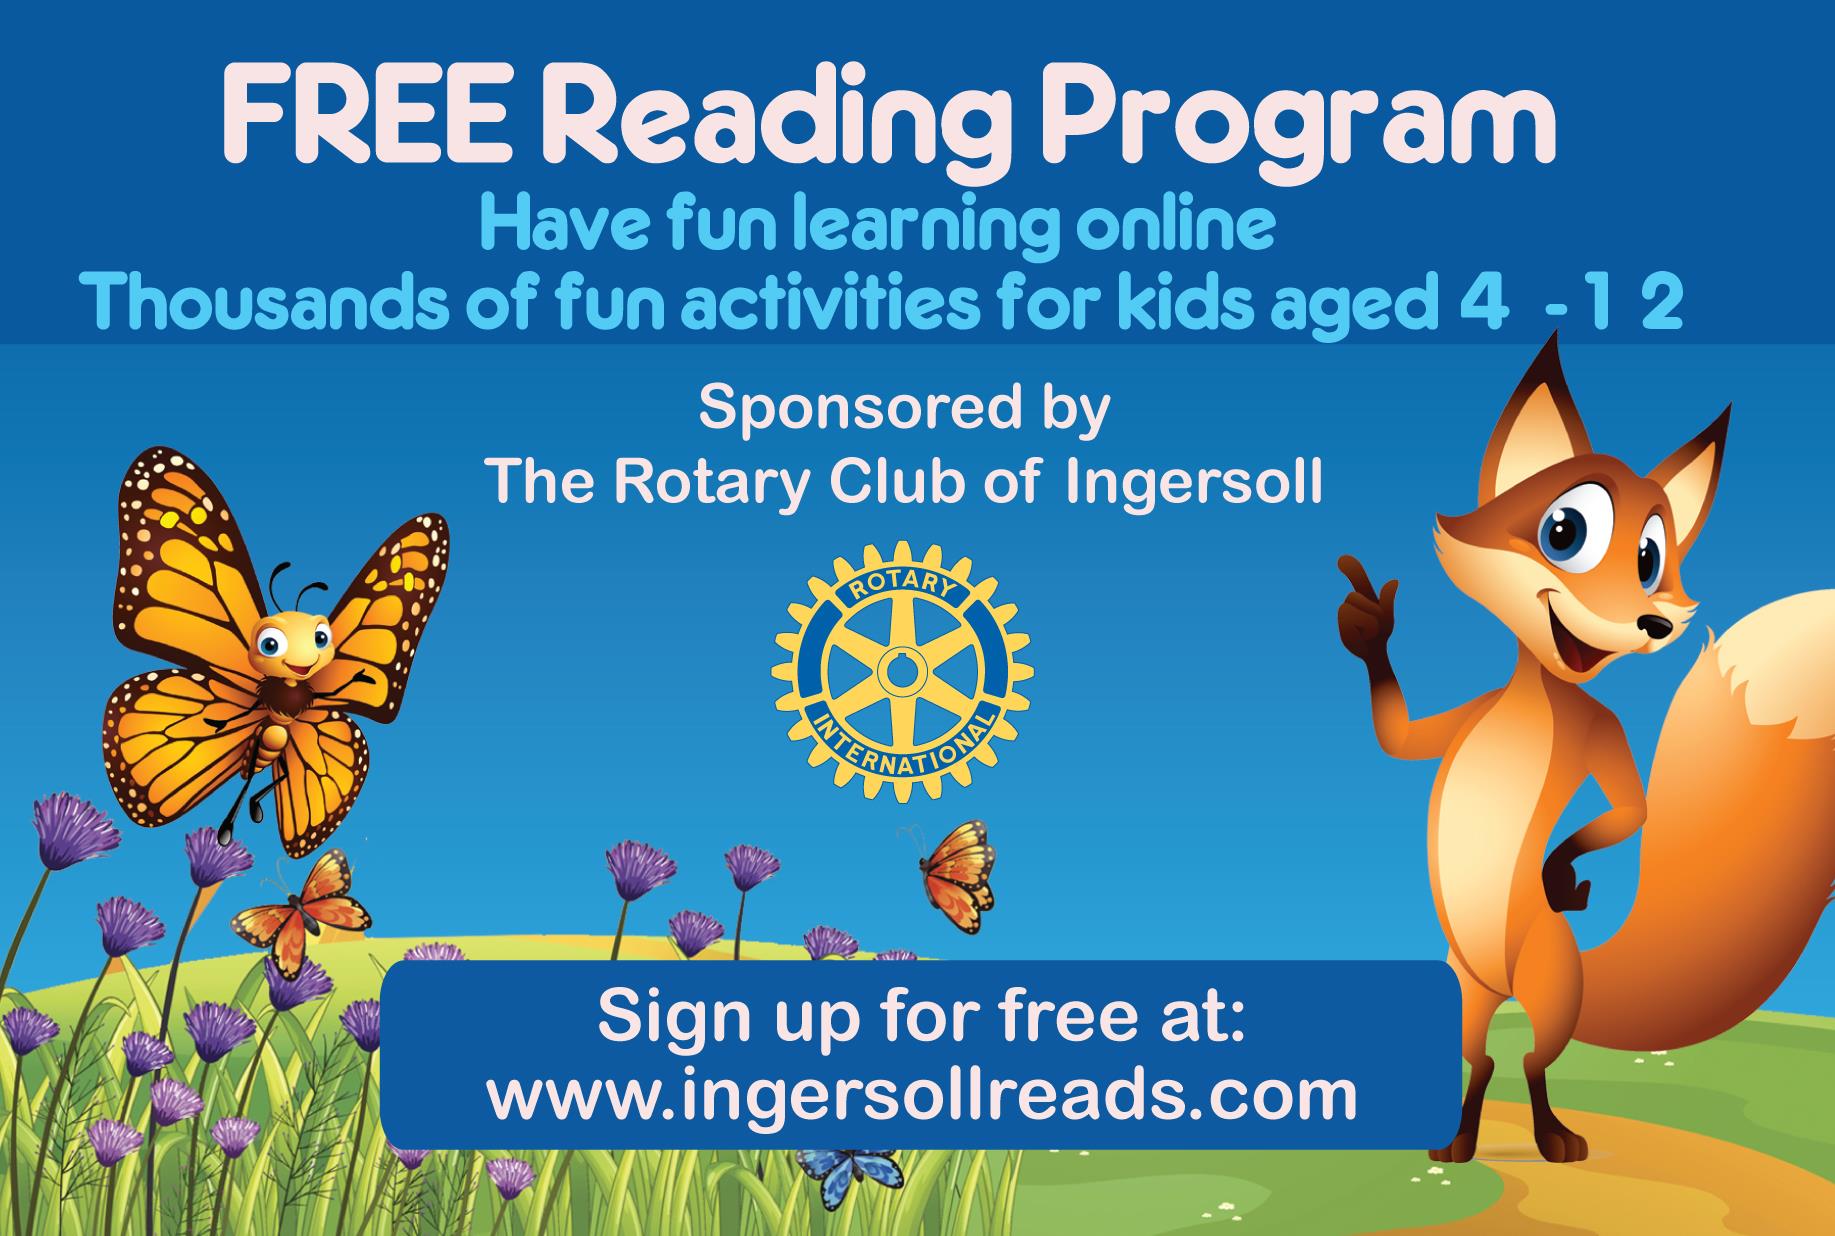 What are some sources of free reading programs for kids?